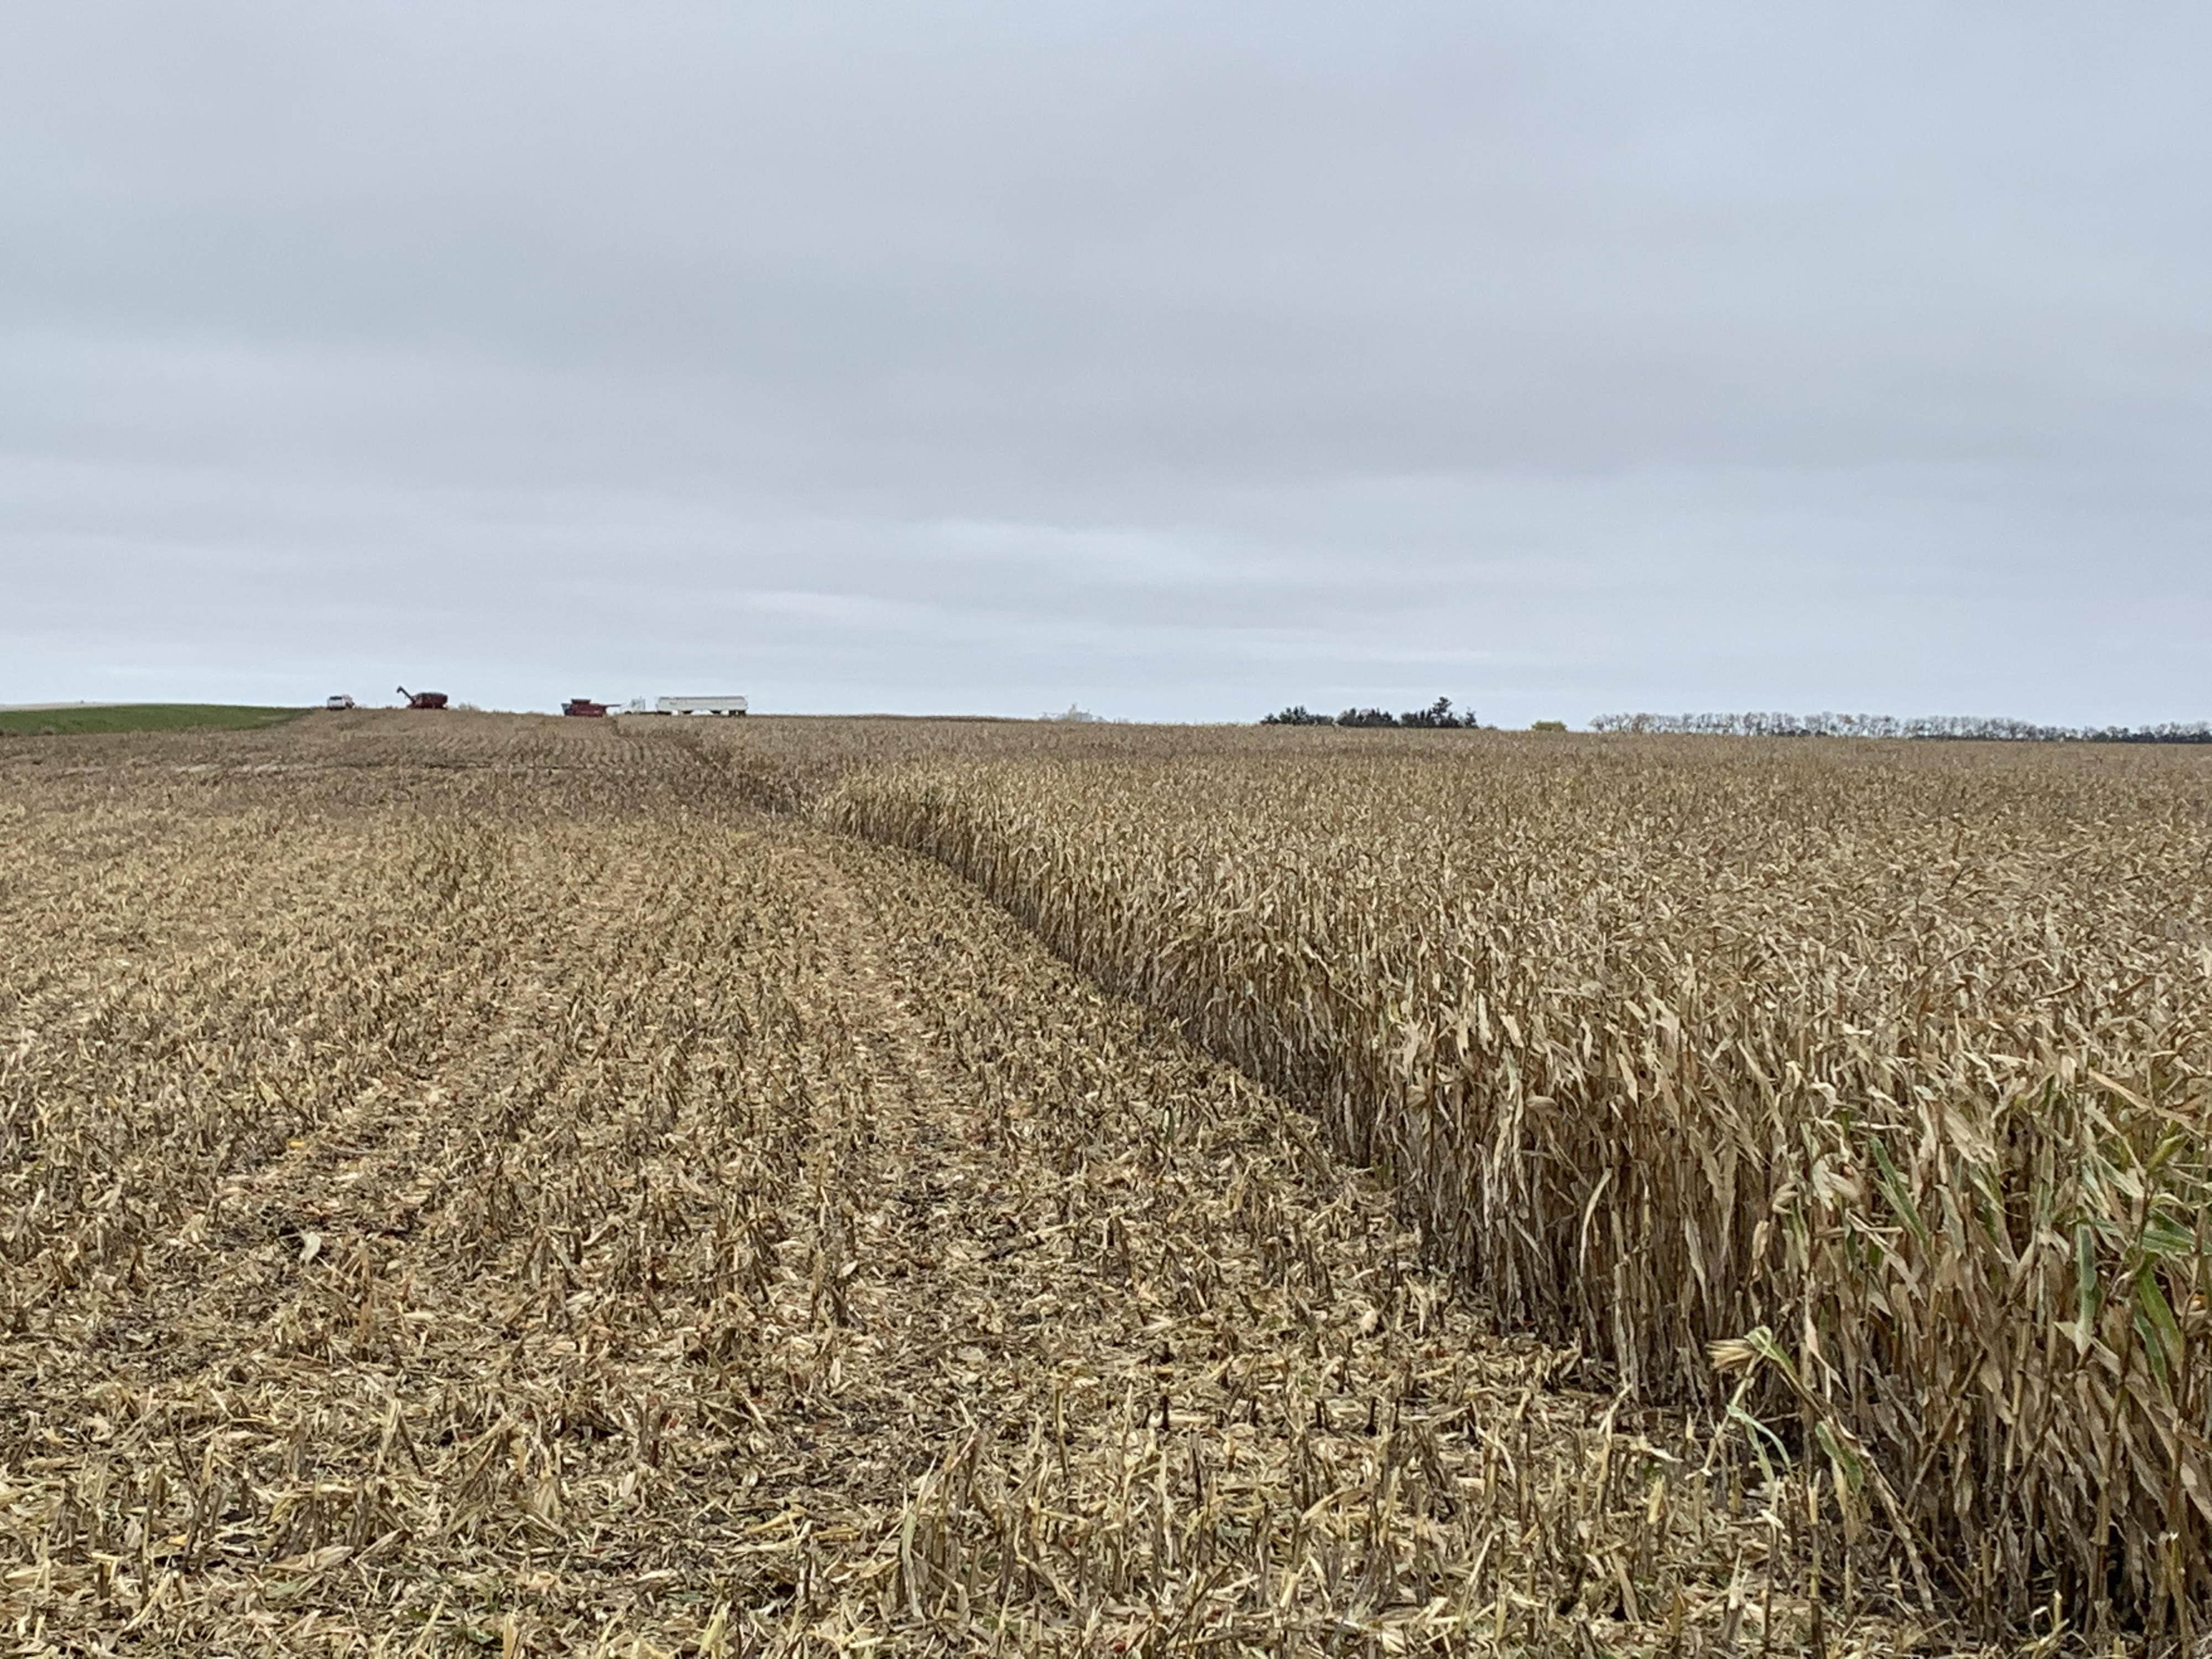 Afternoon Ag News, November 19, 2021: Farmers work to wrap up corn harvest